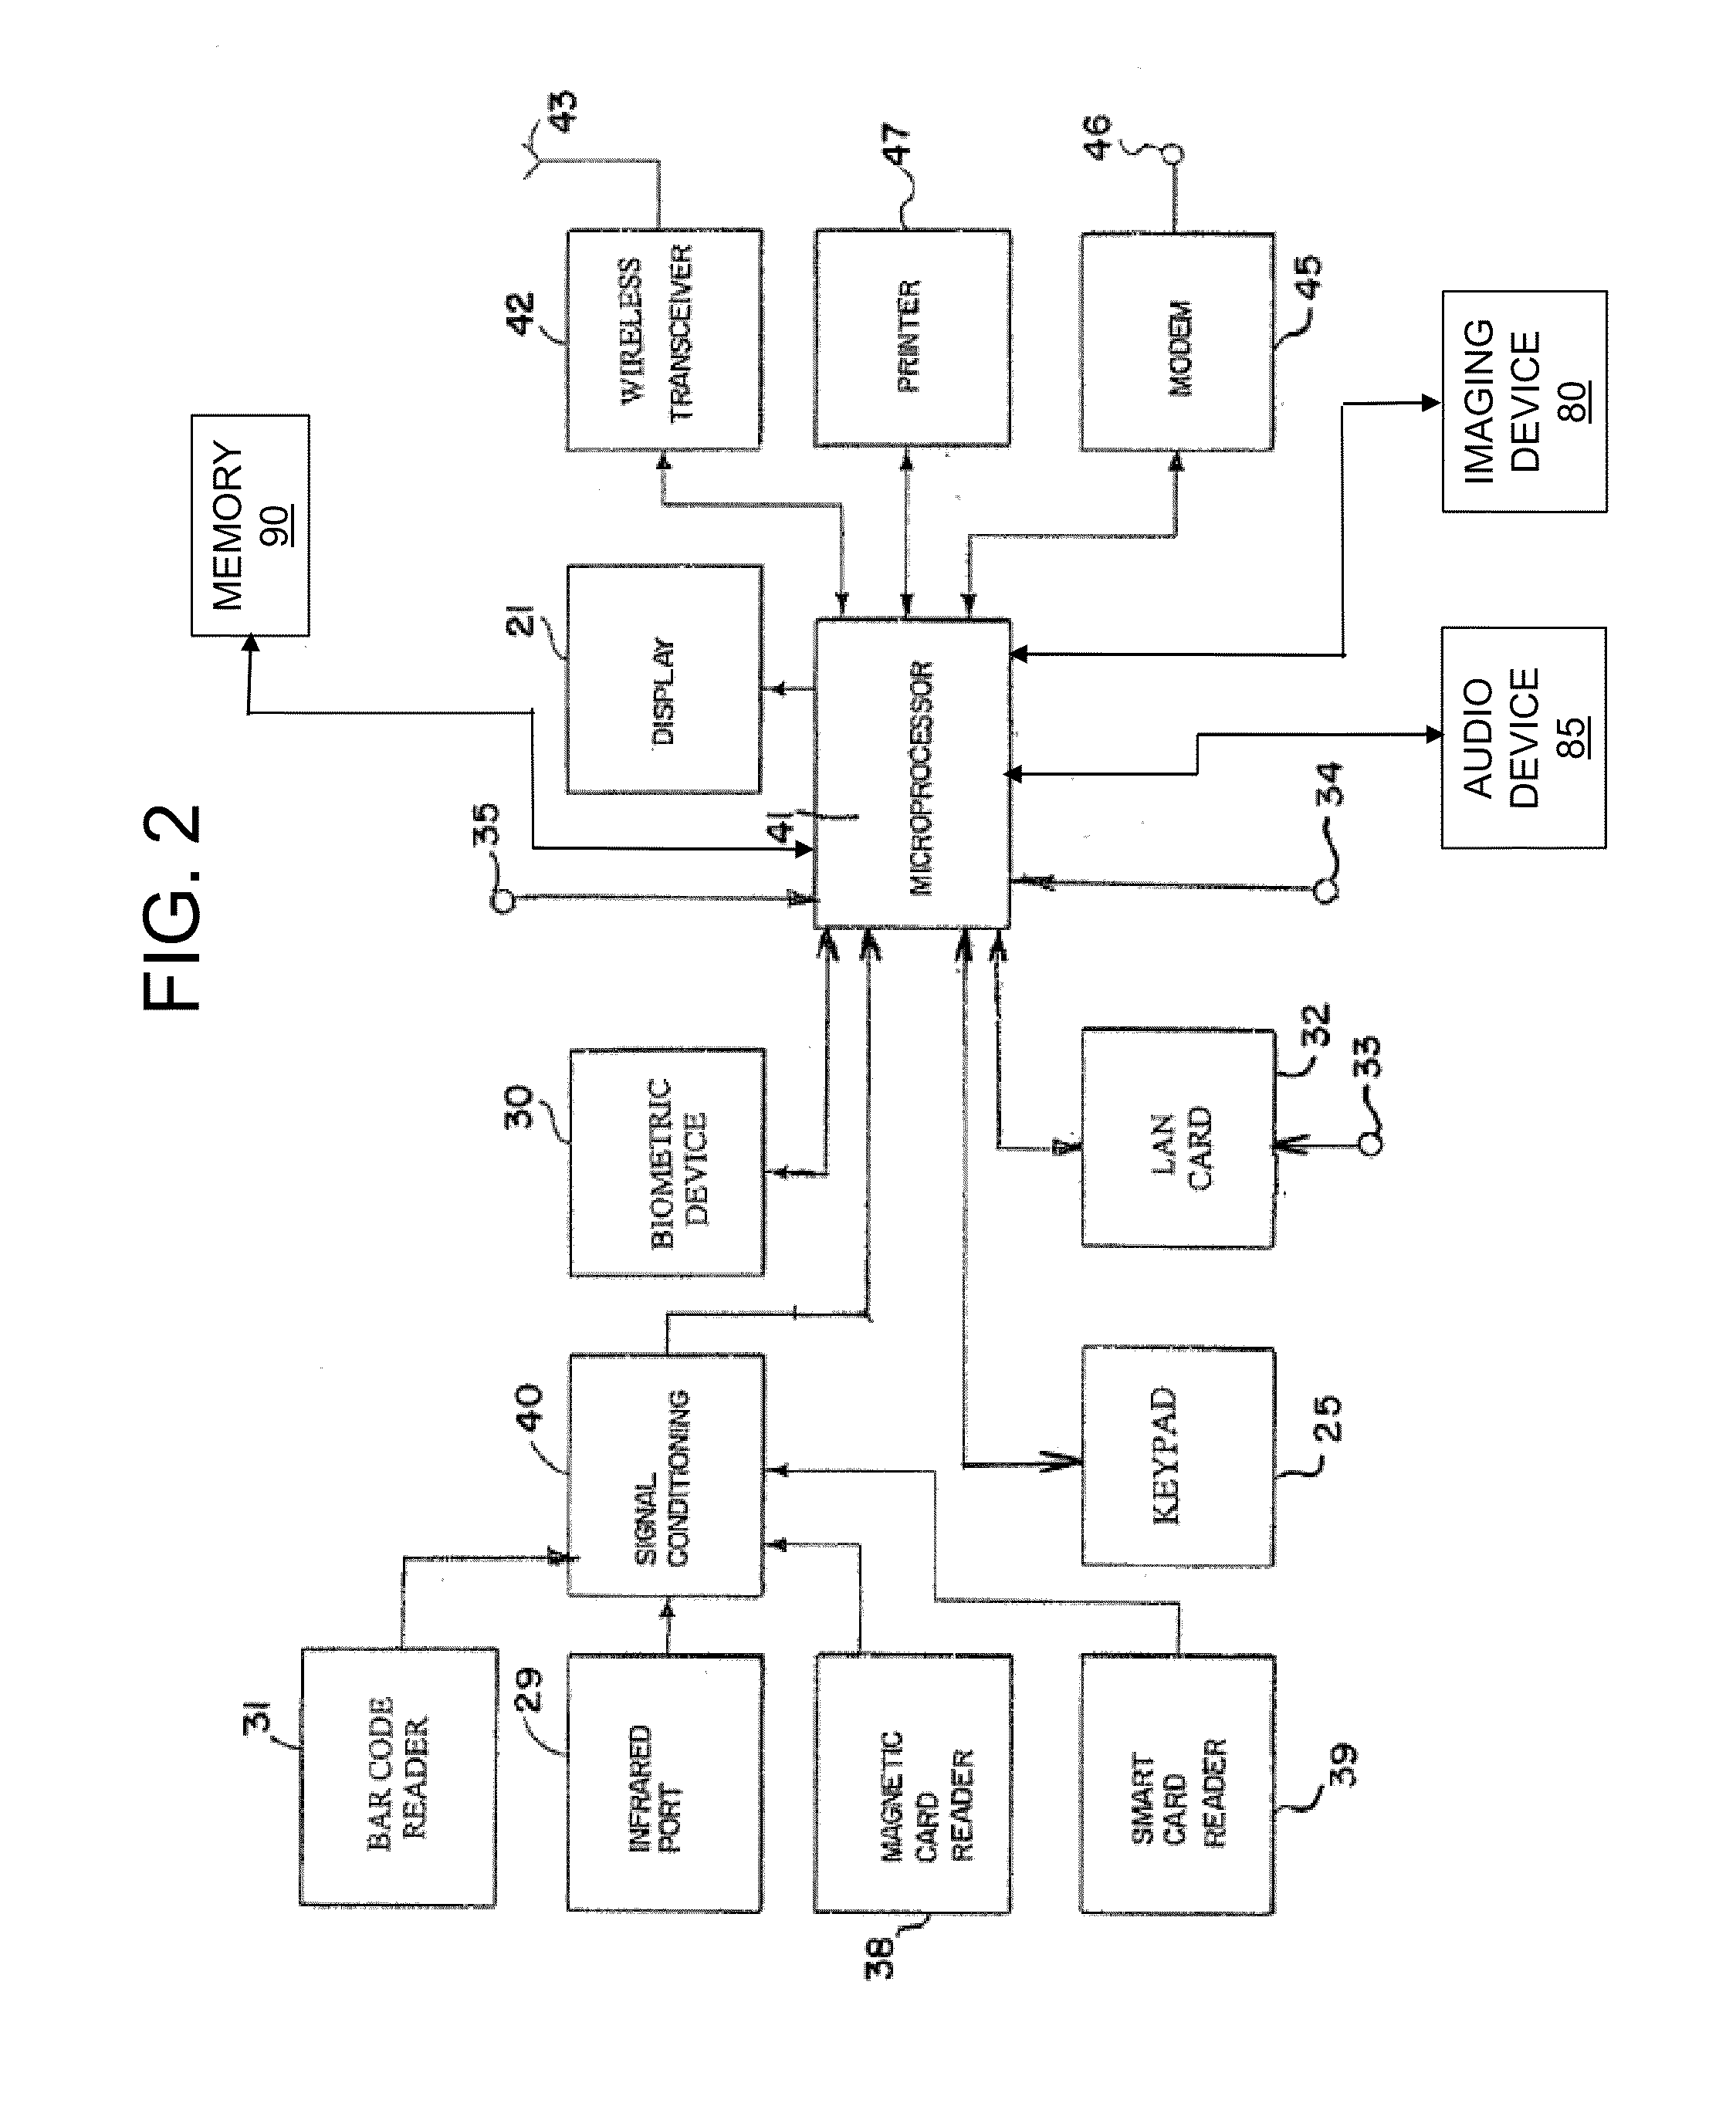 Method and apparatus for hiring workers